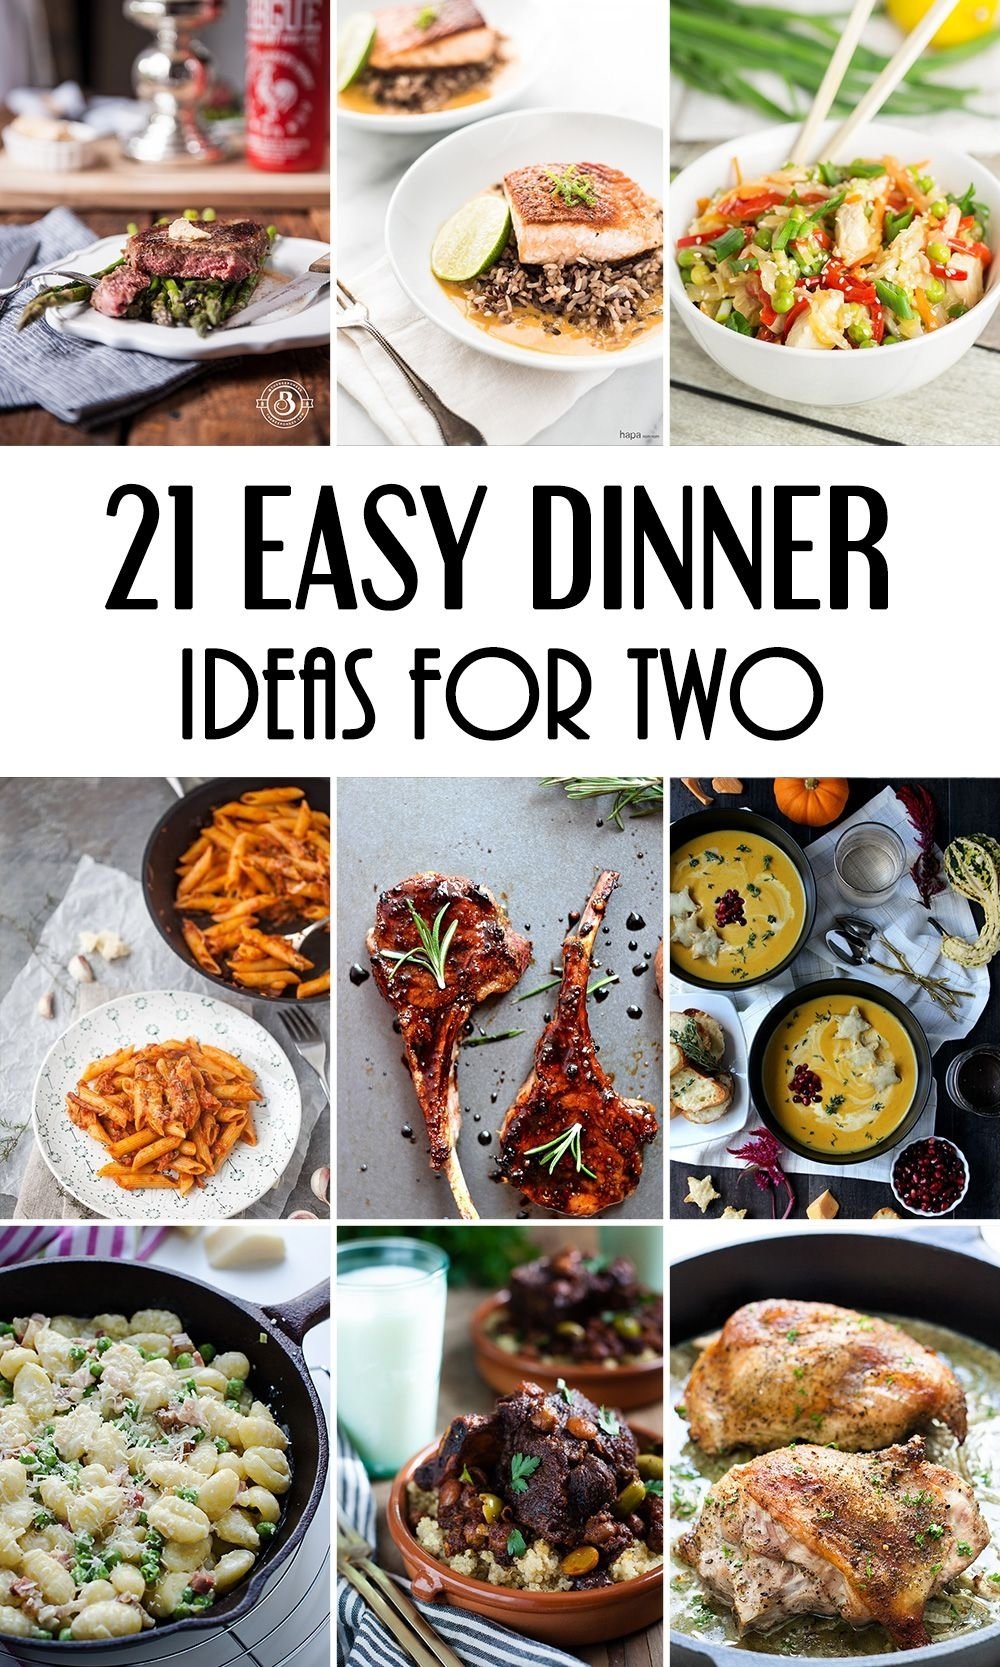 10 Awesome Easy Meal Ideas For Two 21 easy dinner ideas for two that will impress your loved one 1 2022